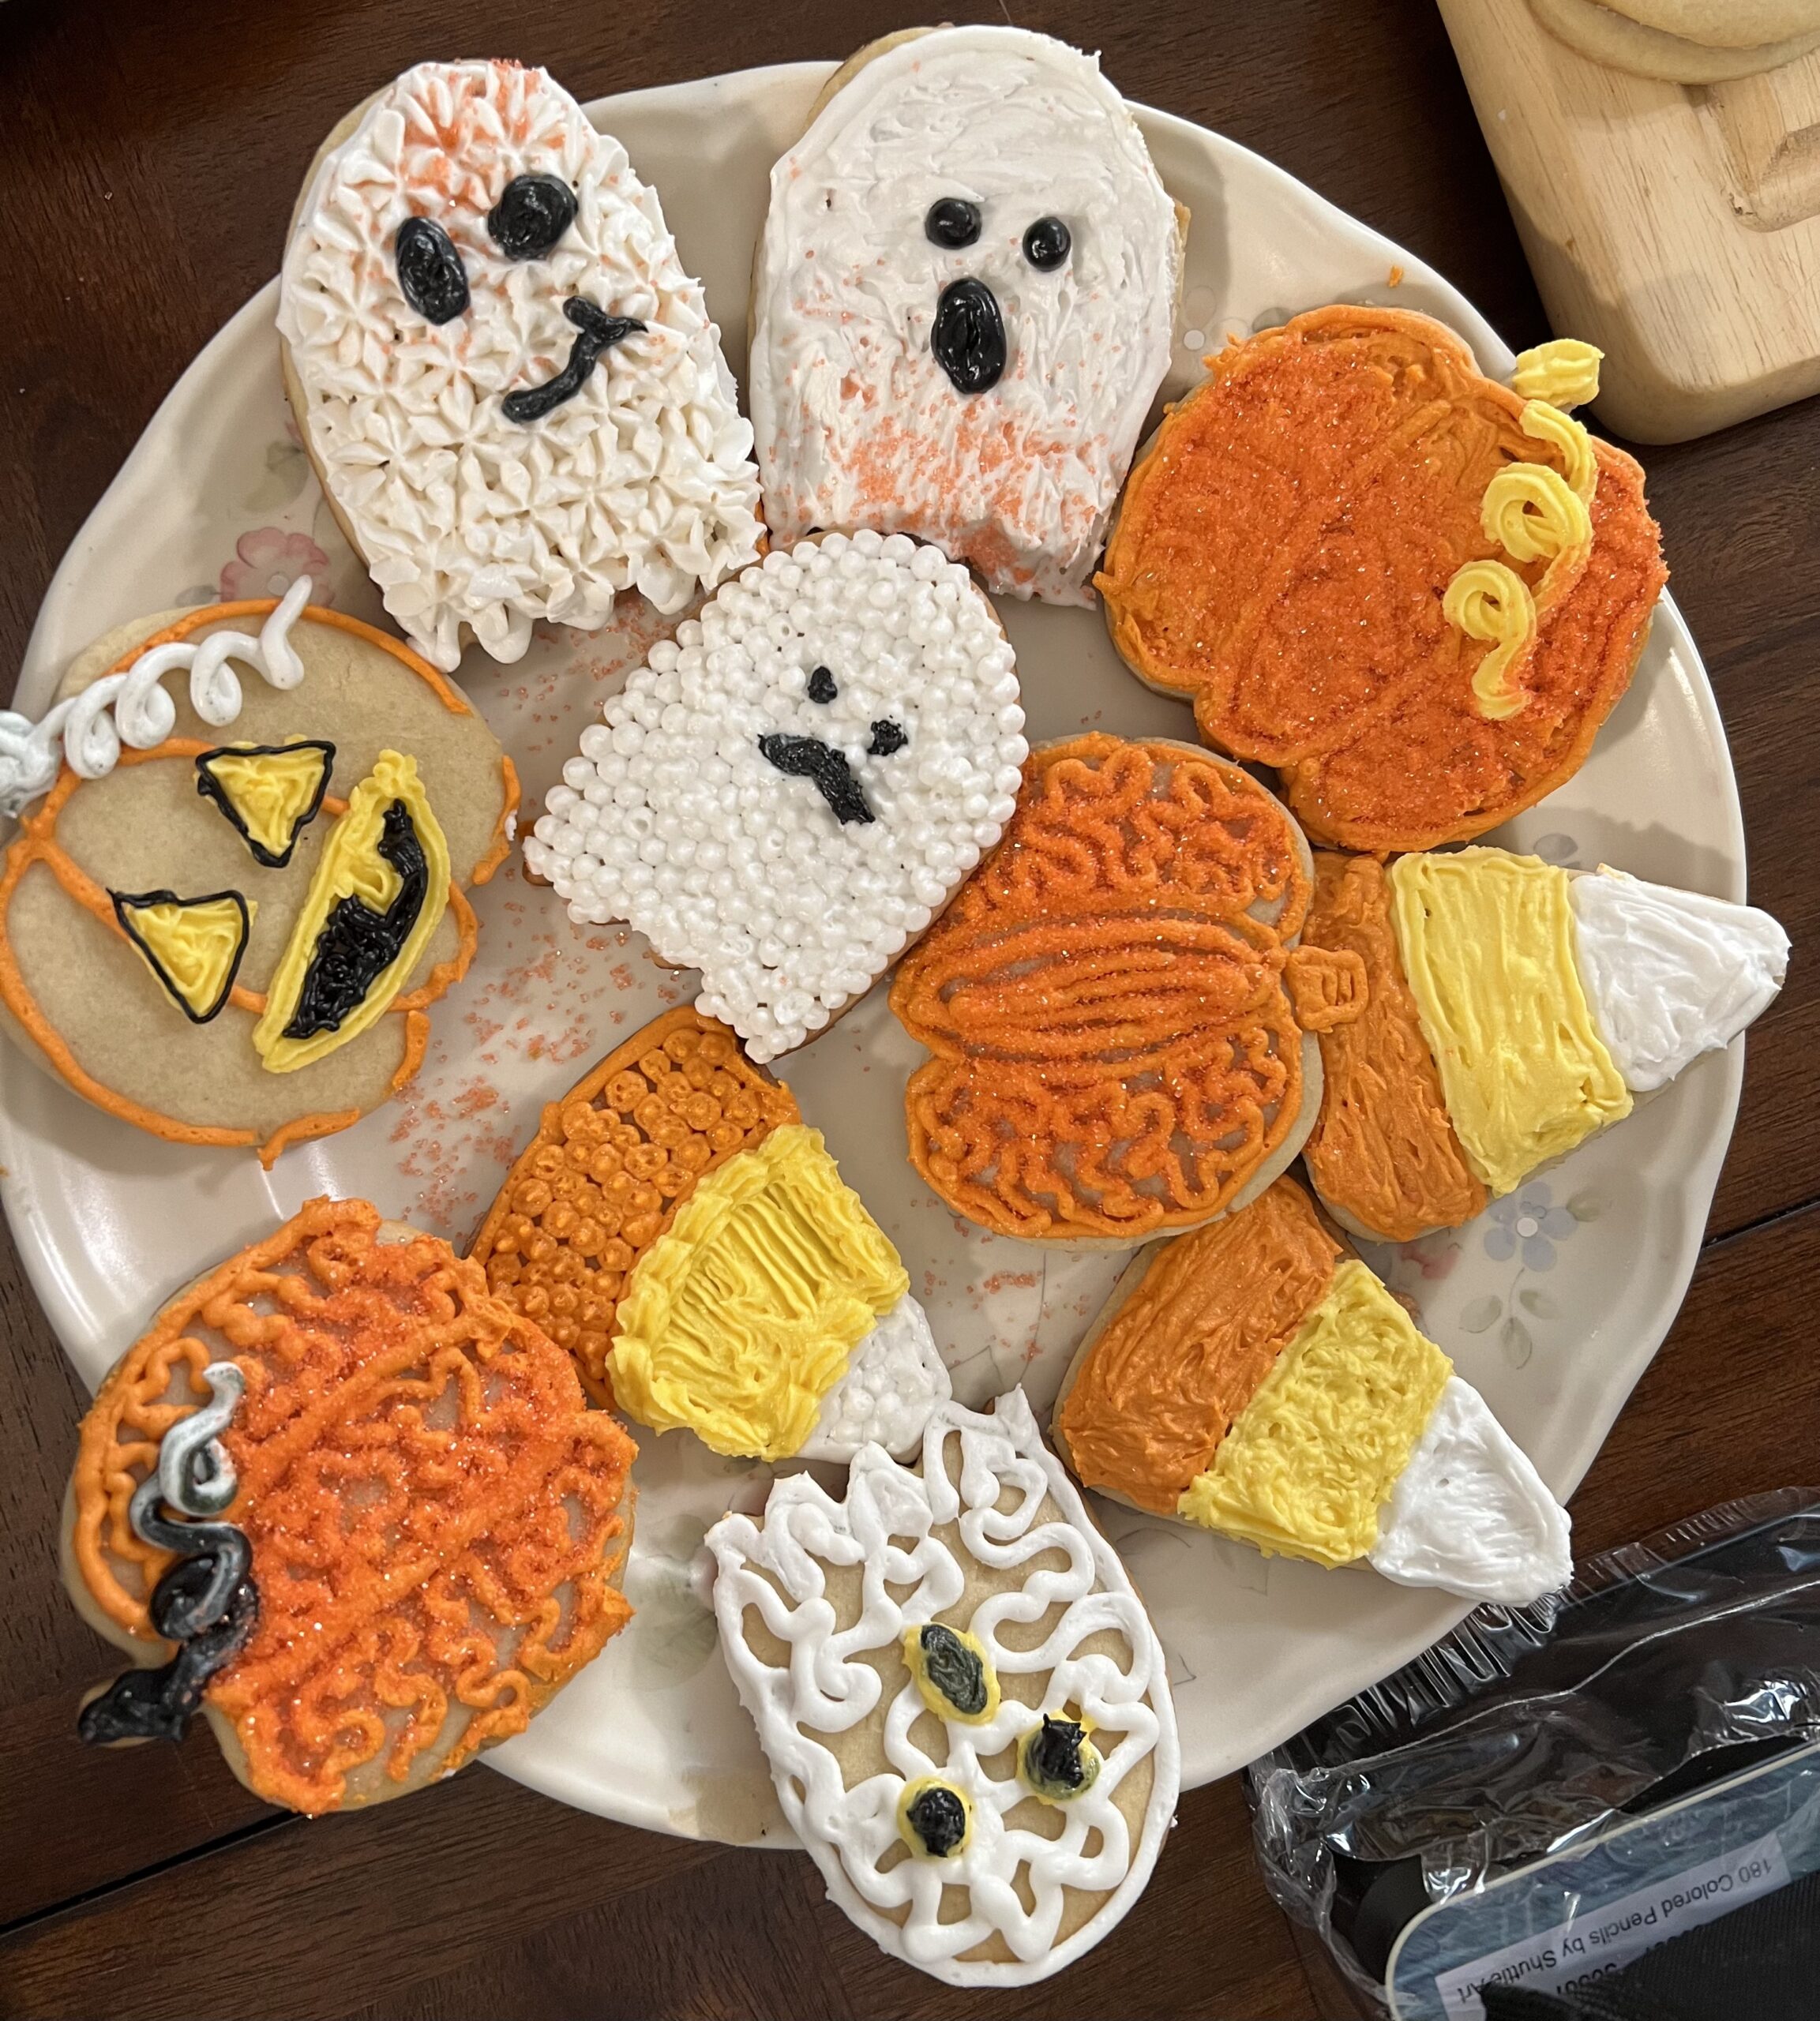 This three-piece Wilton Halloween cookie cutter set includes a ghost, candy corn, and pumpkin. Use your imagination to decorate.